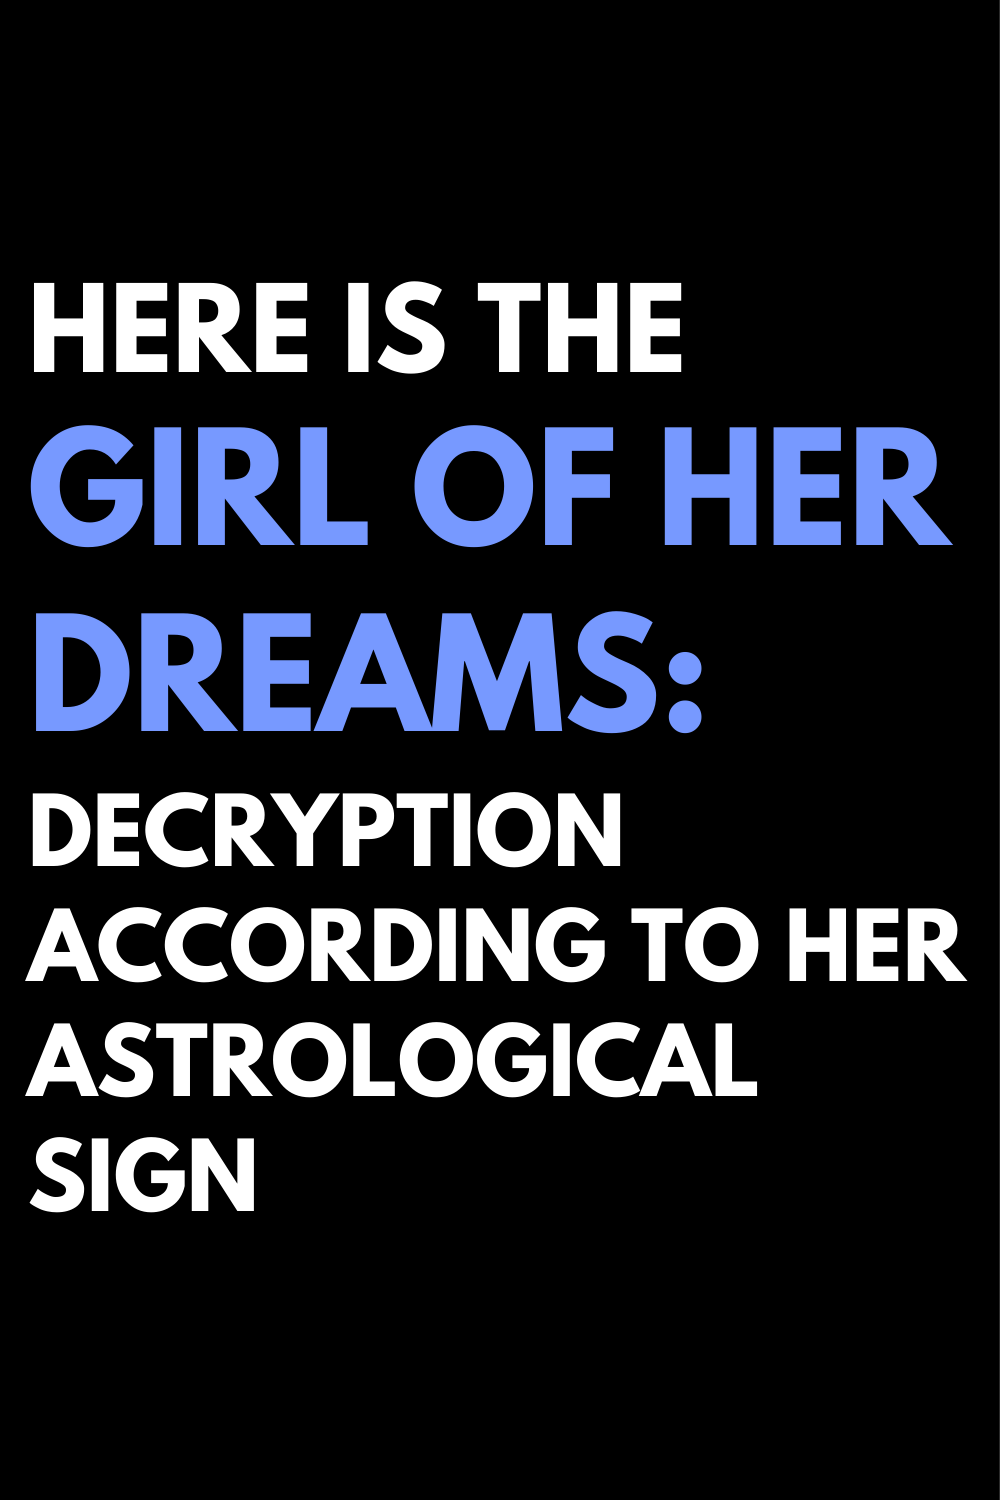 Here is the girl of her dreams: decryption according to her astrological sign